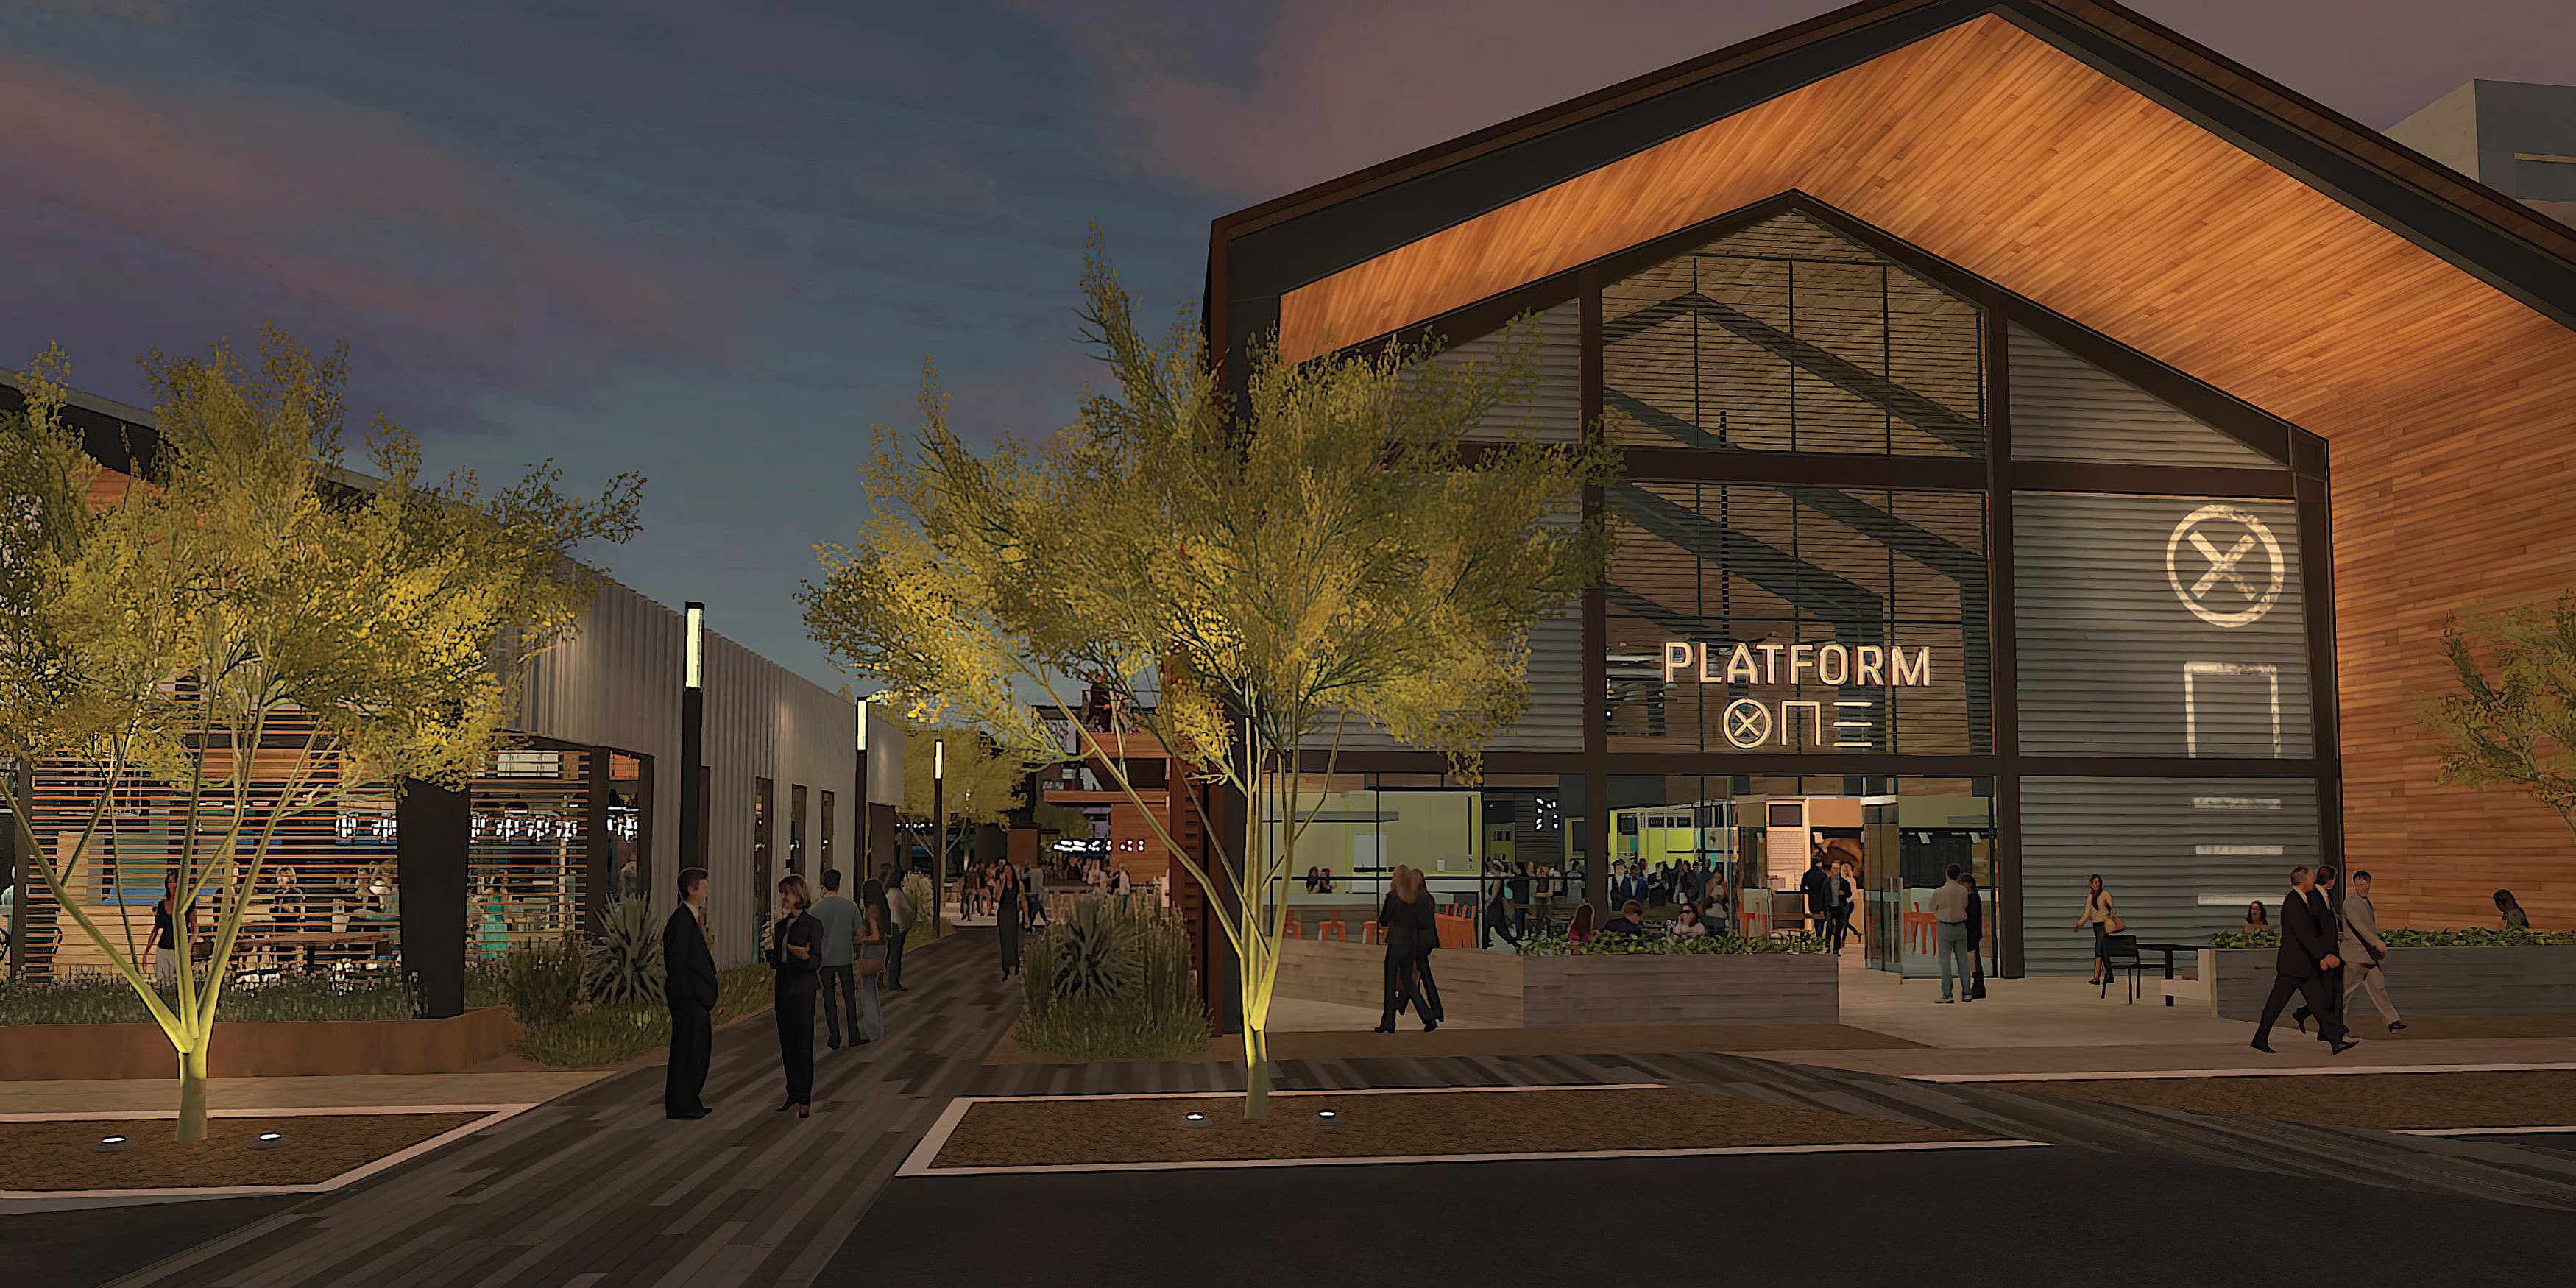 Architectural rendering of Platform One at Uncommons, a neighborhood food hall in Las Vegas, Nevada. RSM Design worked to develop the name, identity system and brand guidelines.‍